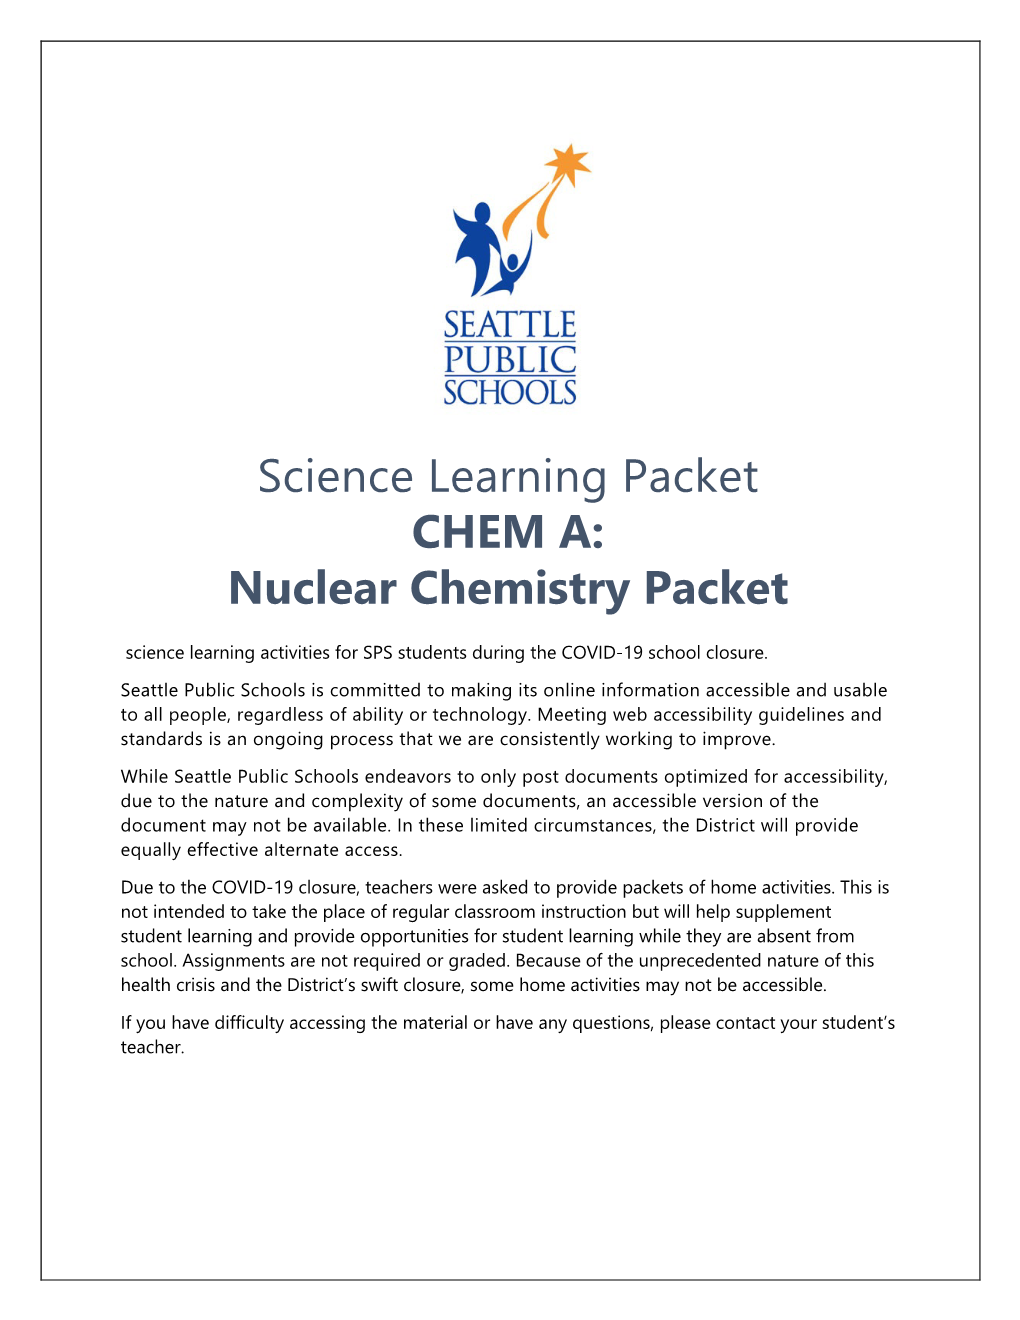 Nuclear Chemistry Packet